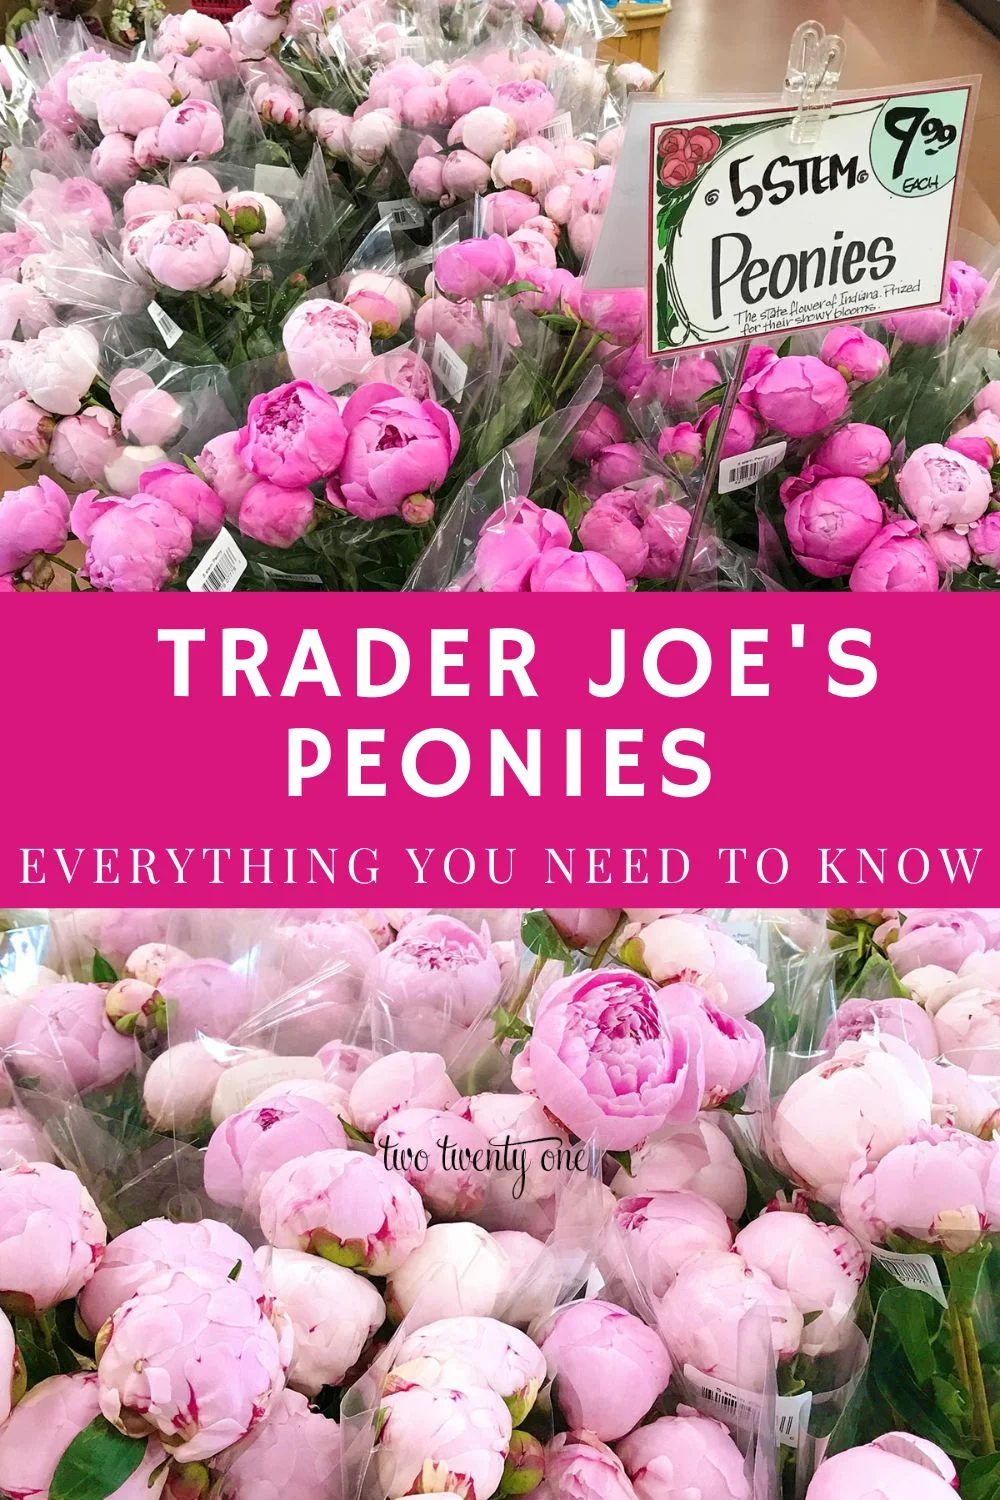 Trader Joe’s Peonies – Available This Spring!